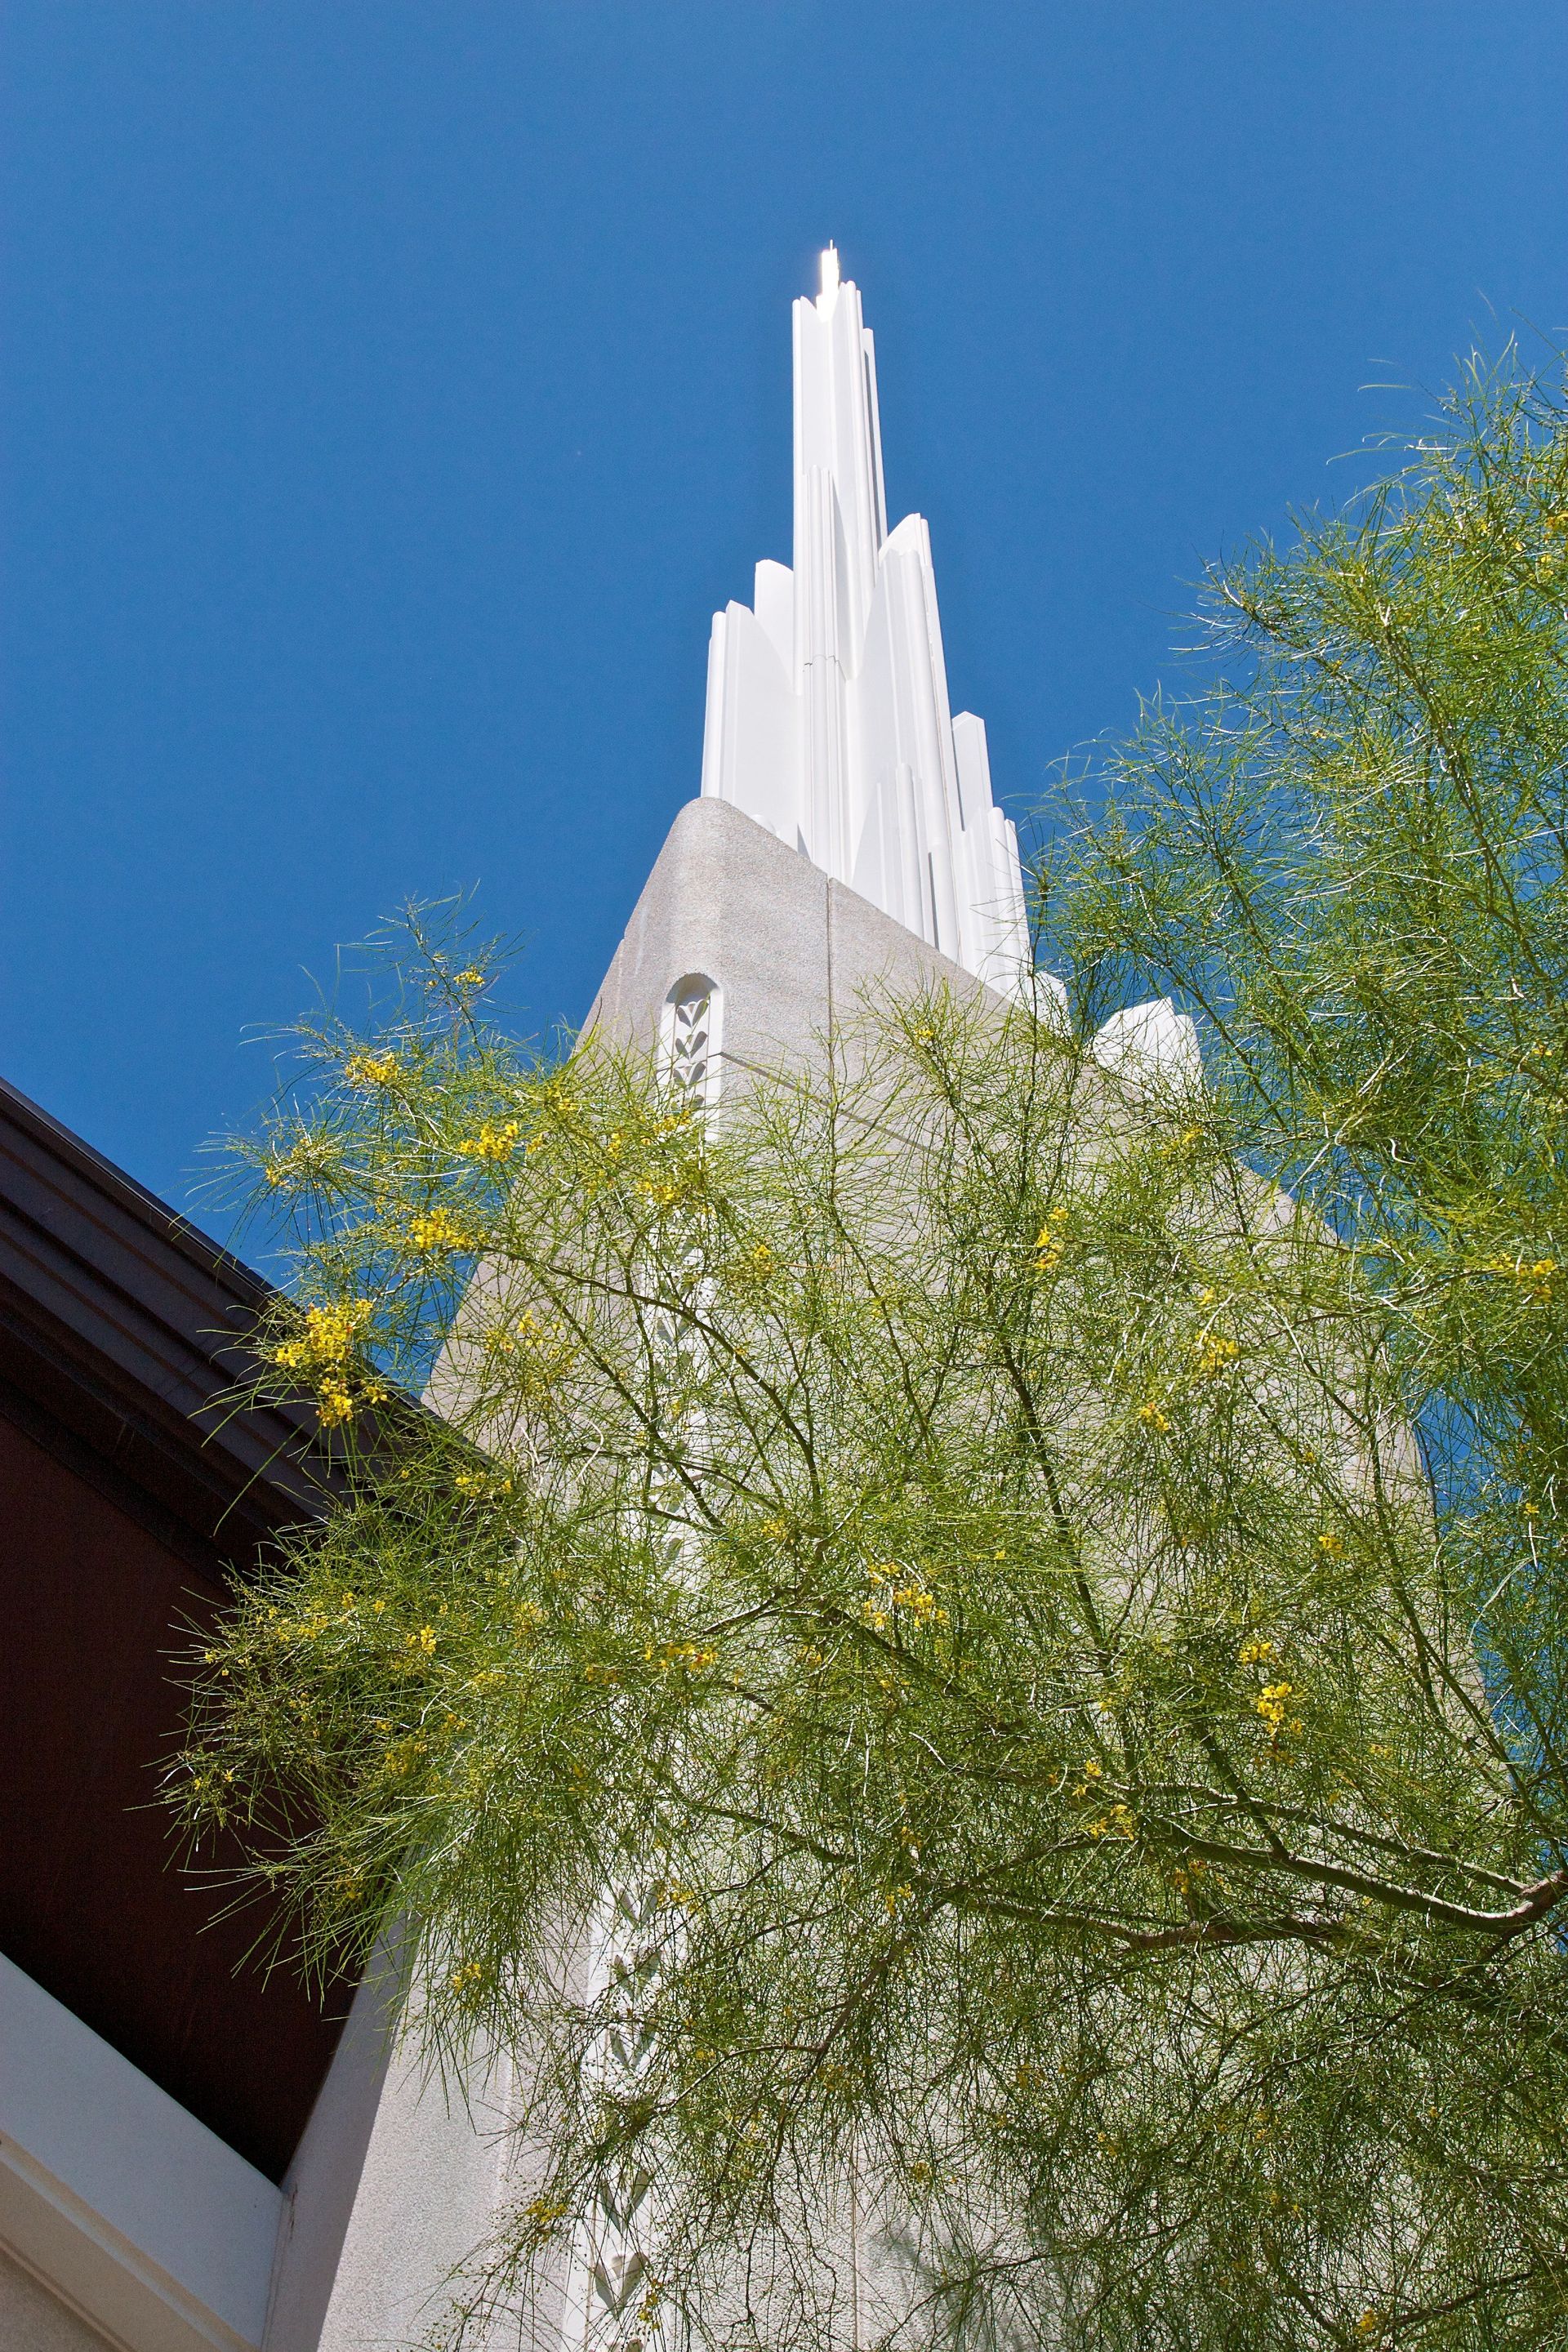 The single spire of the Las Vegas Nevada Temple, including scenery.